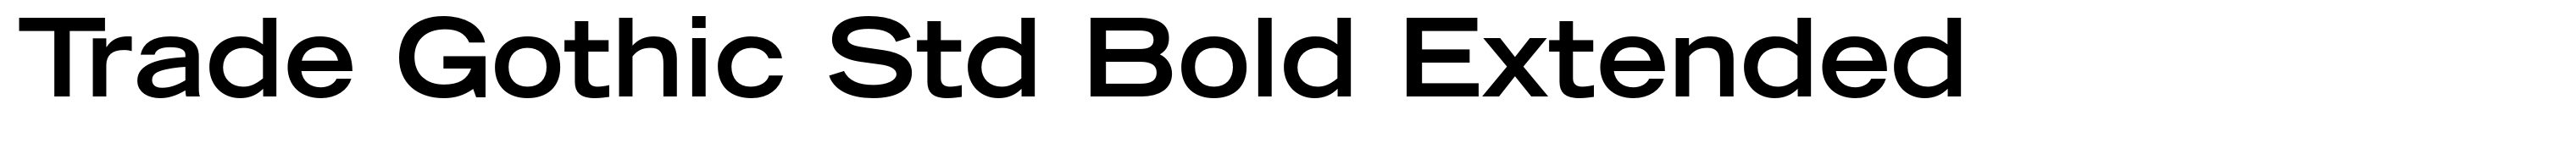 Trade Gothic Std Bold Extended